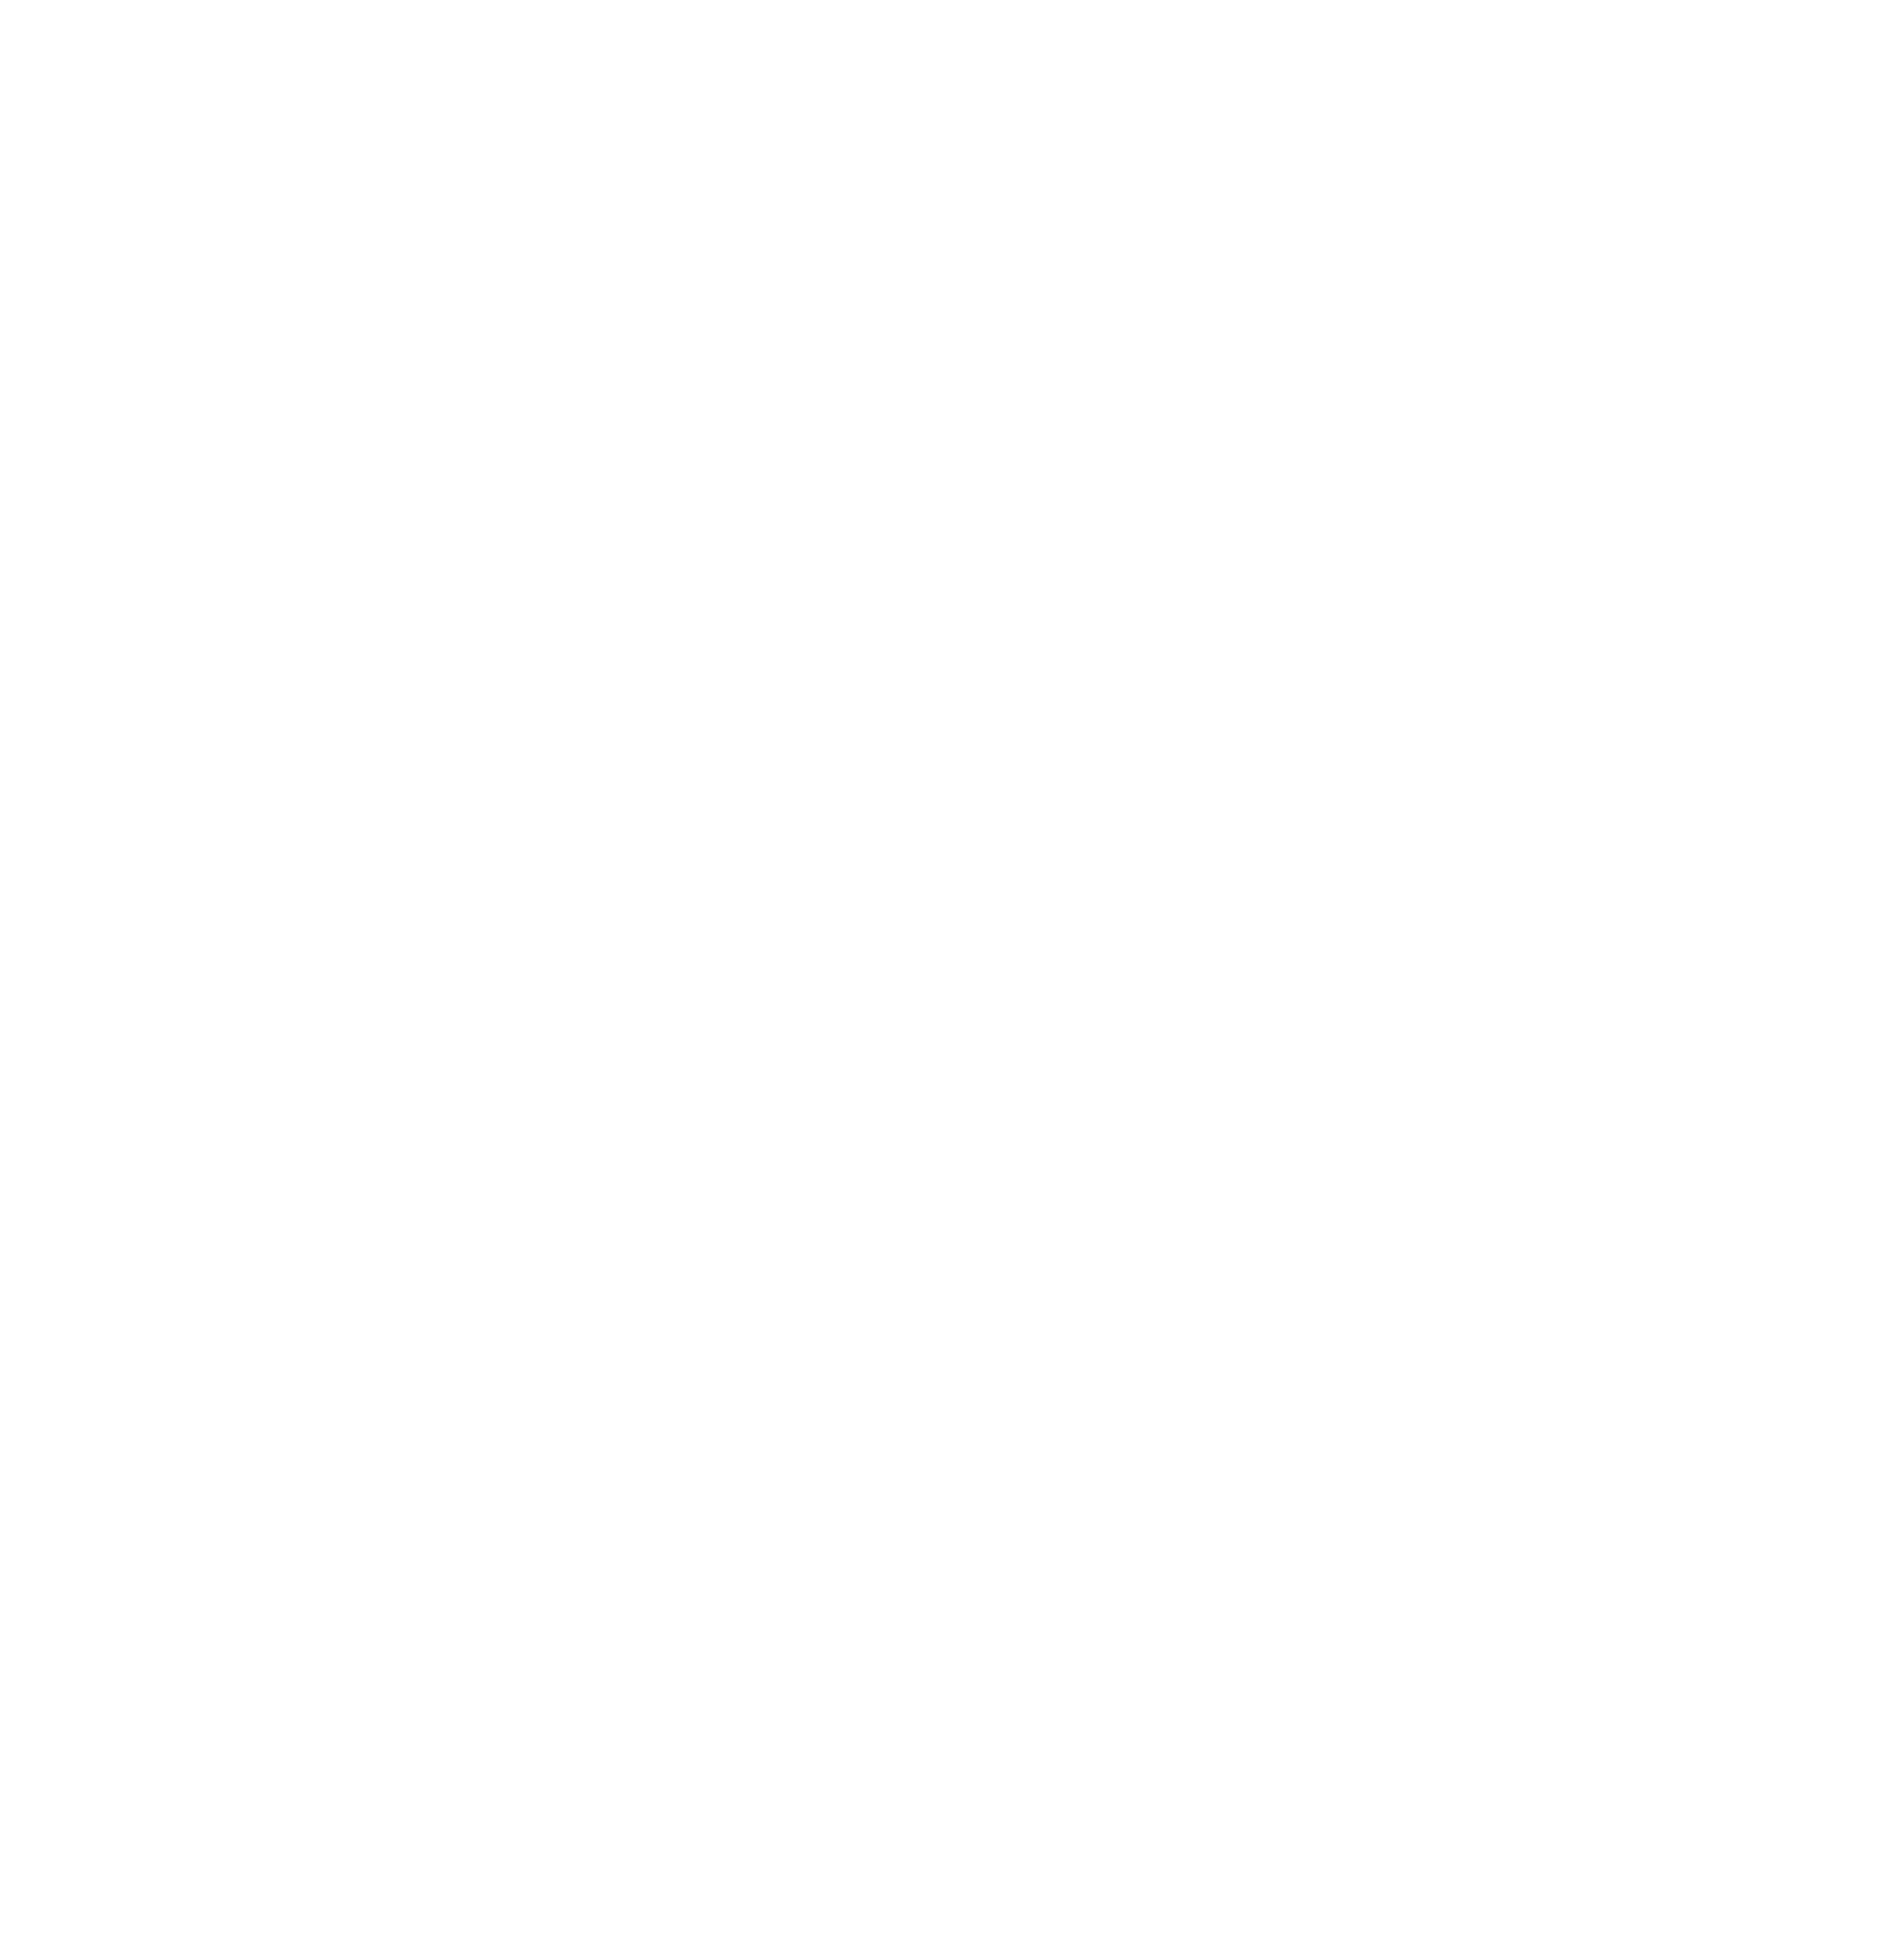 Follow Voquent on X (formally Twitter)